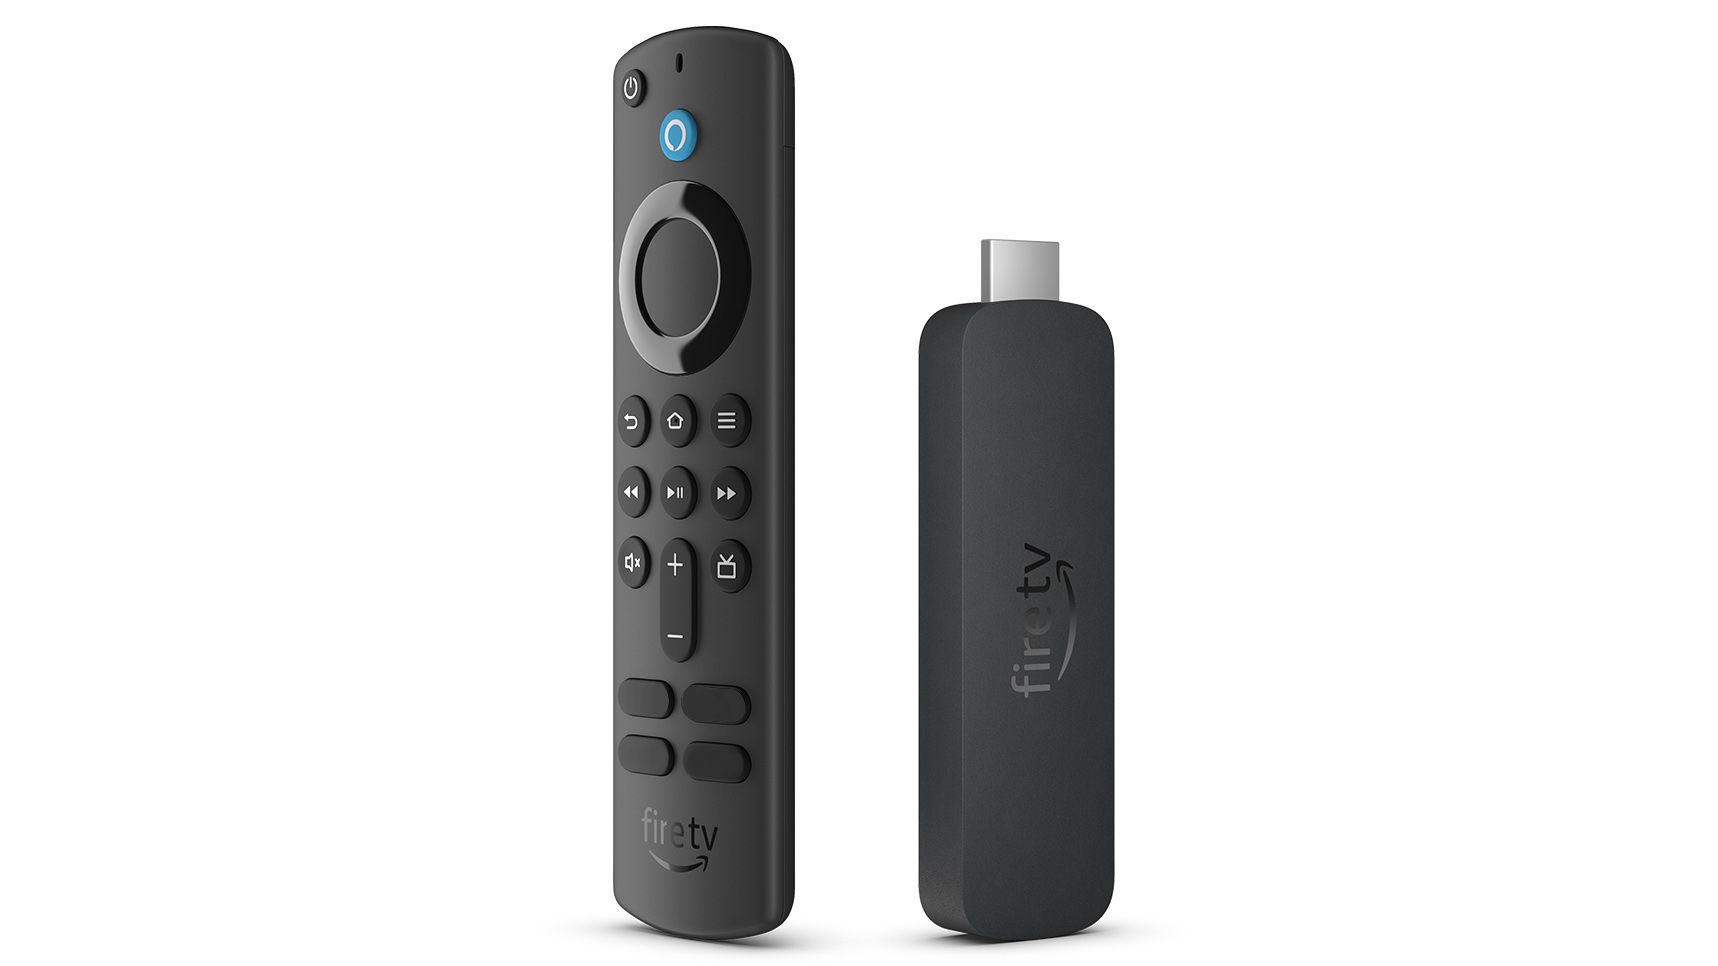 redesigns Fire TV, introduces new Fire TV Stick and low-cost Fire TV  Stick Lite